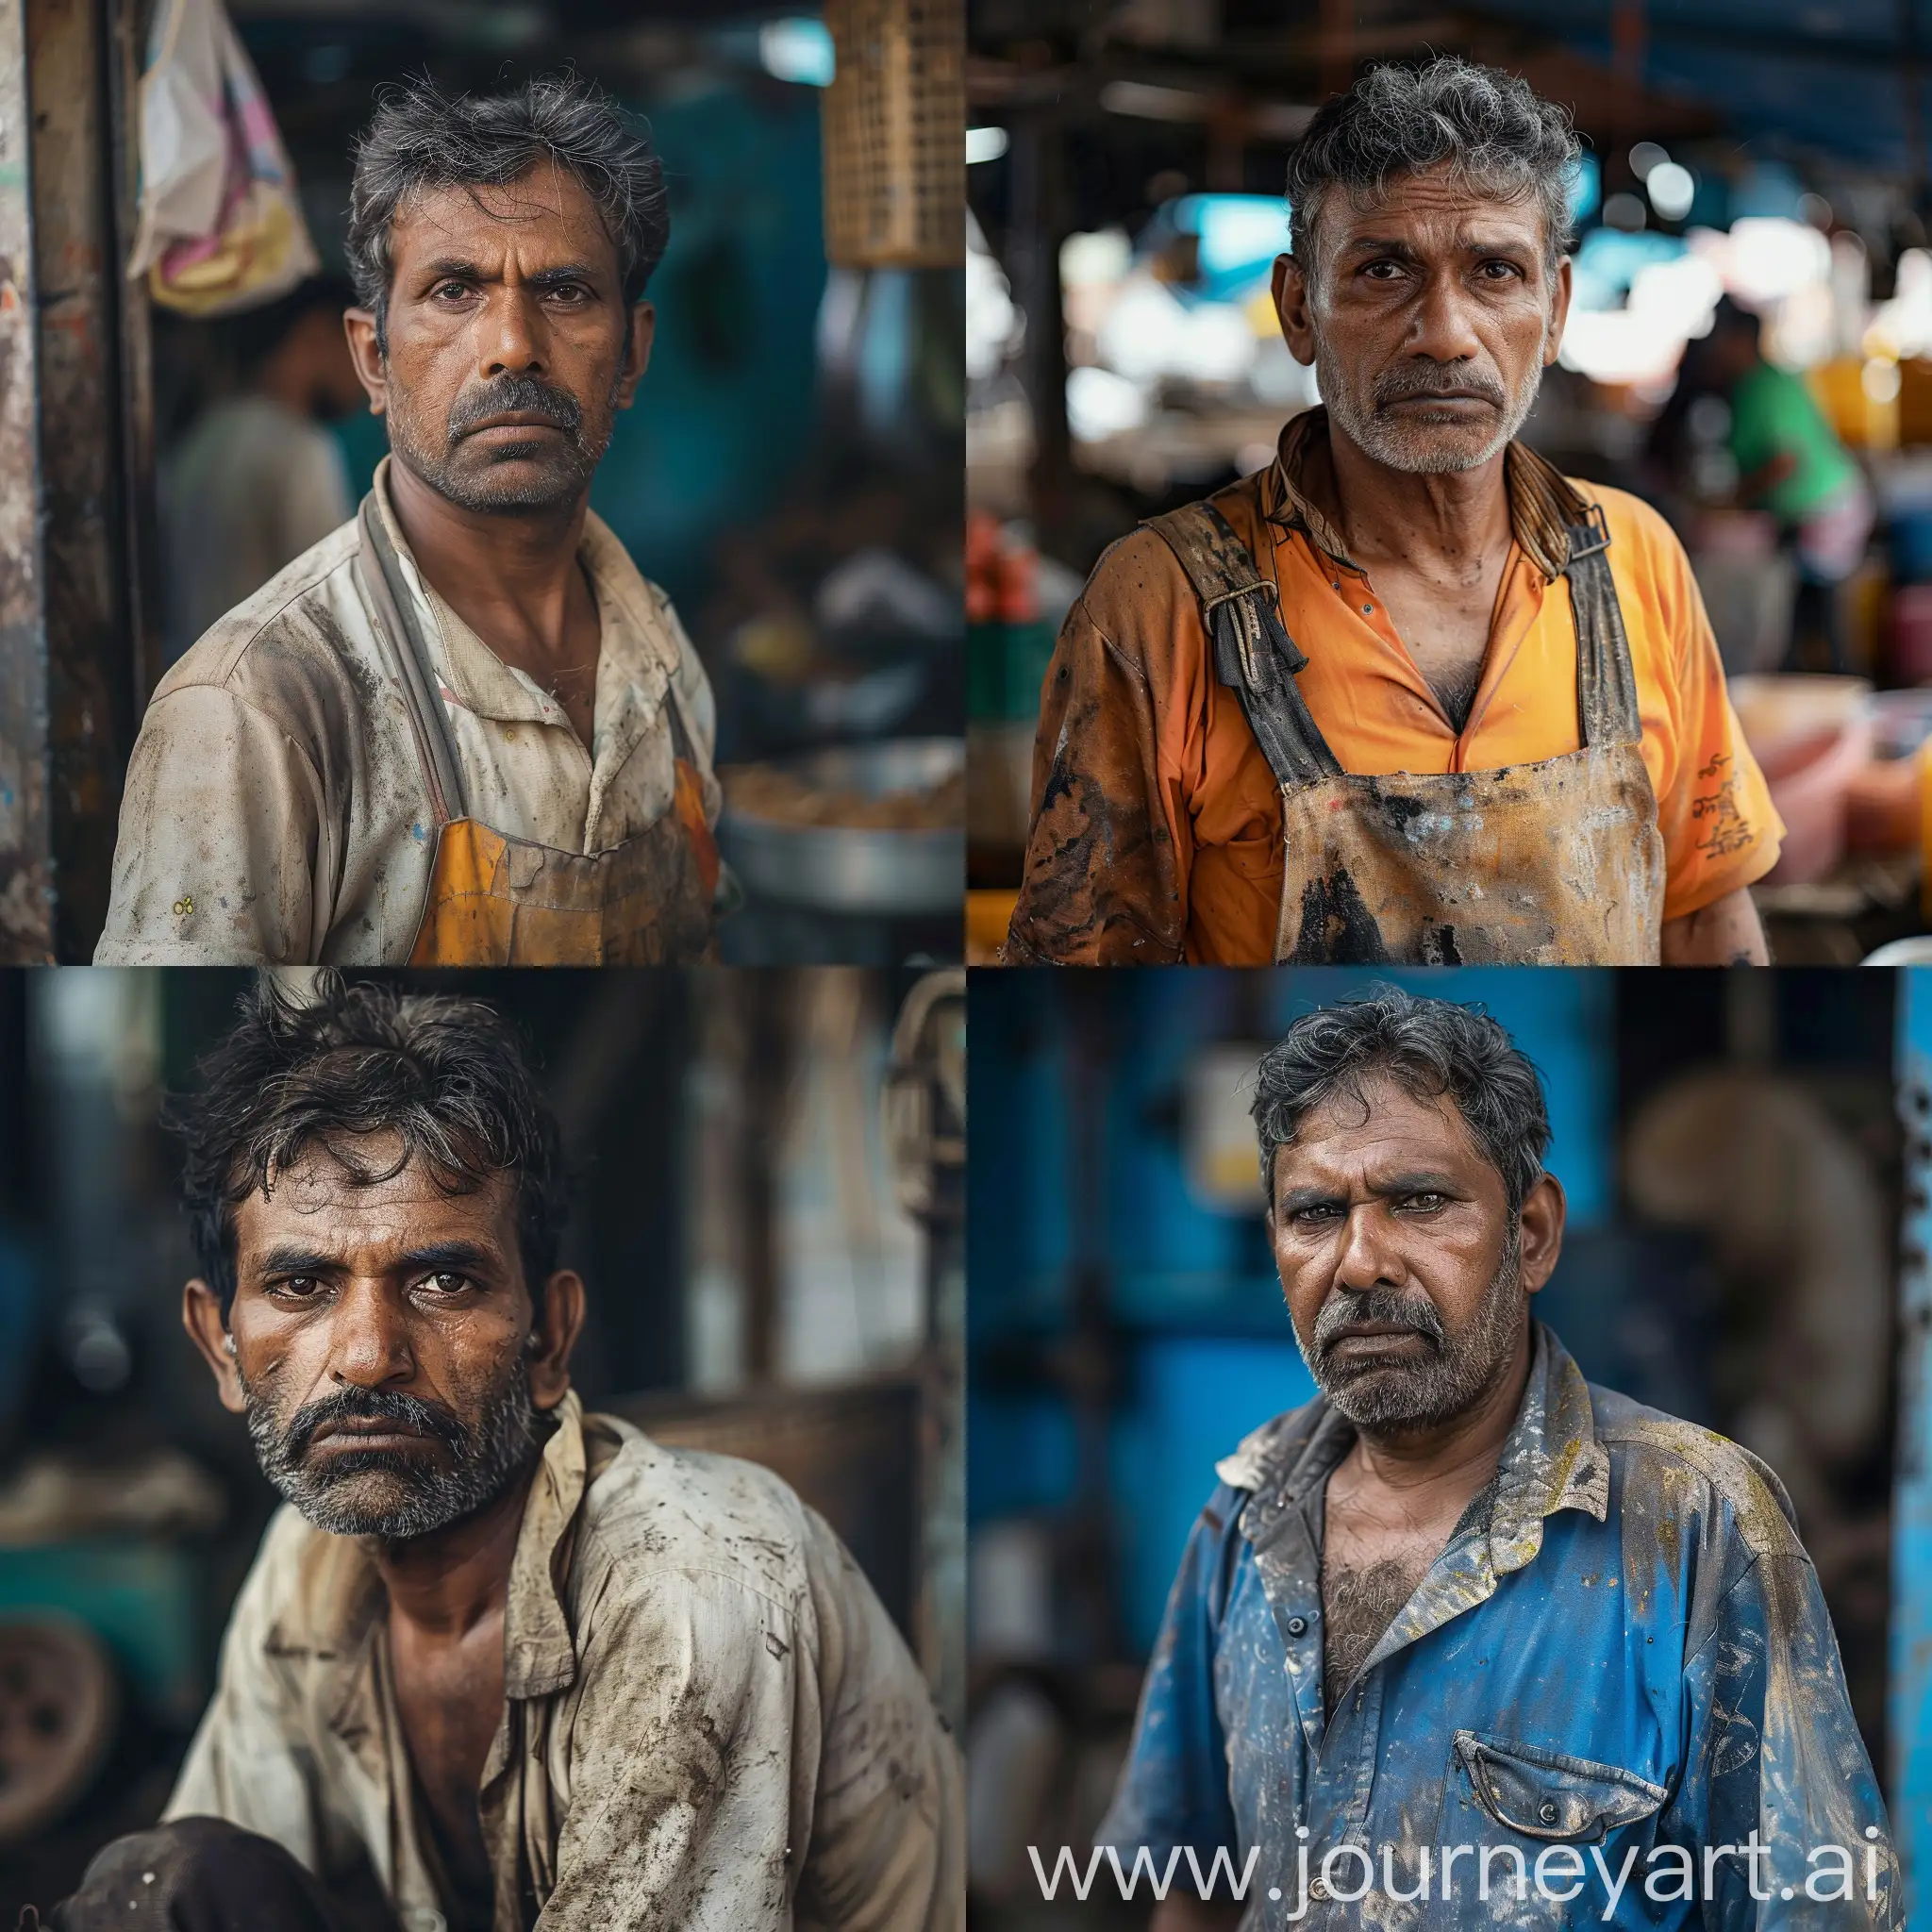 Struggling-MiddleAged-Worker-Surviving-on-Meager-Wages